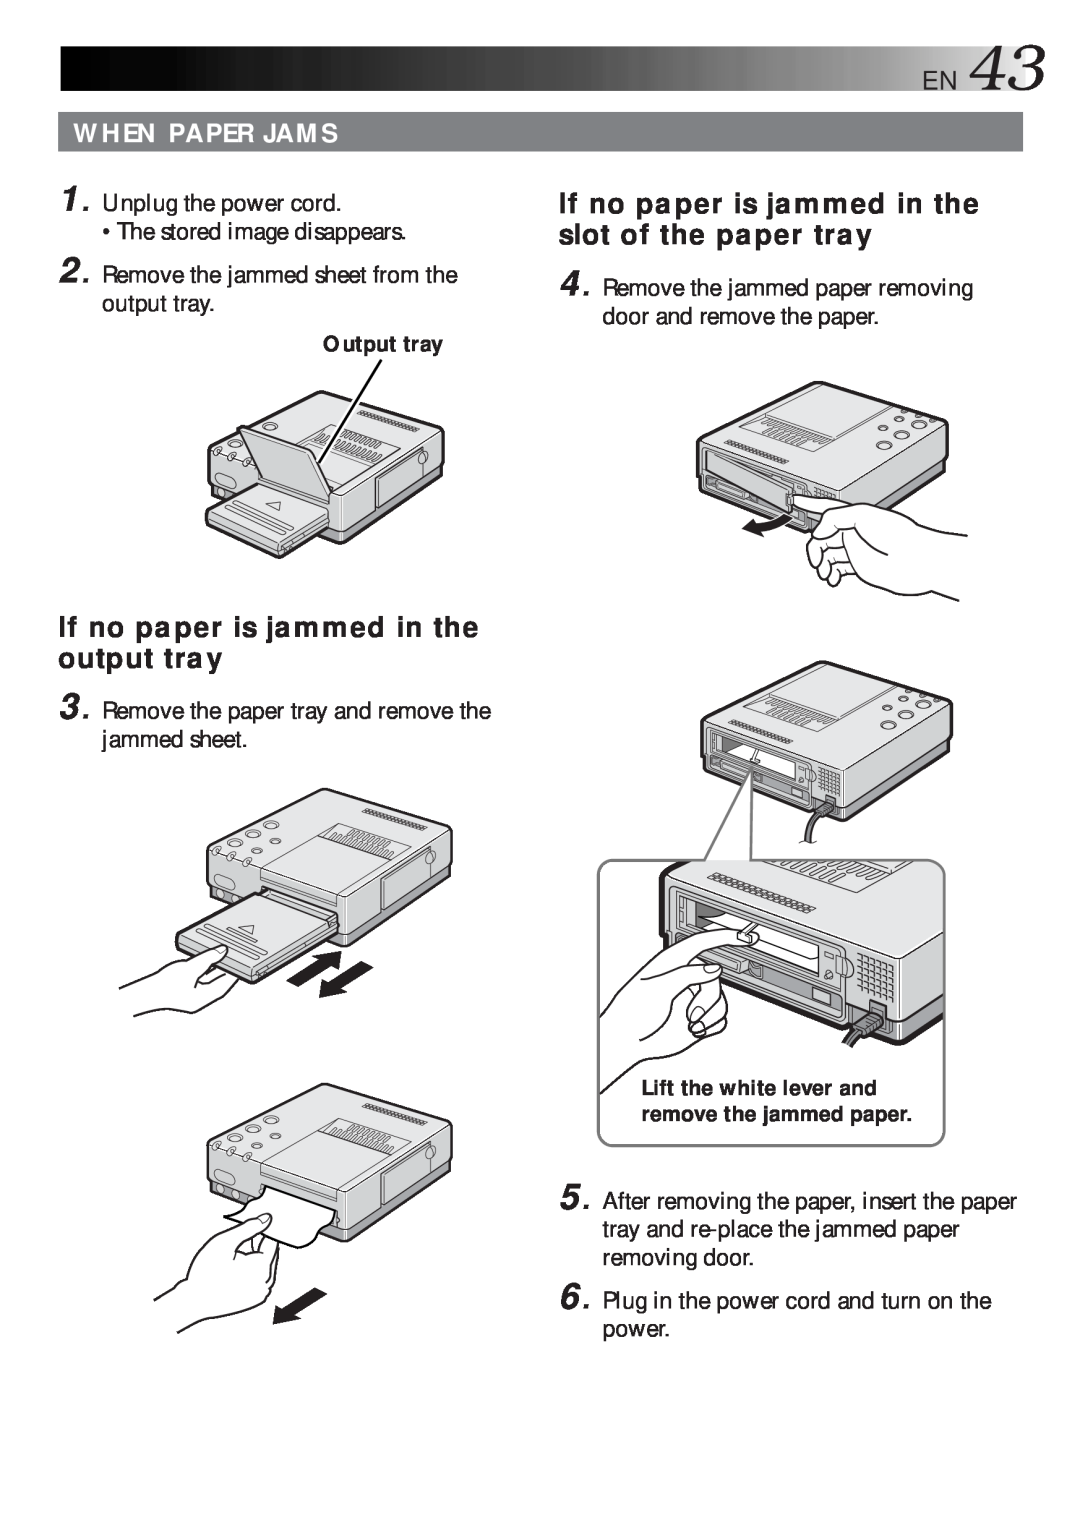 JVC GV-DT1 manual slot of the paper tray, If no paper is jammed in the output tray, When Paper Jams, Output tray 